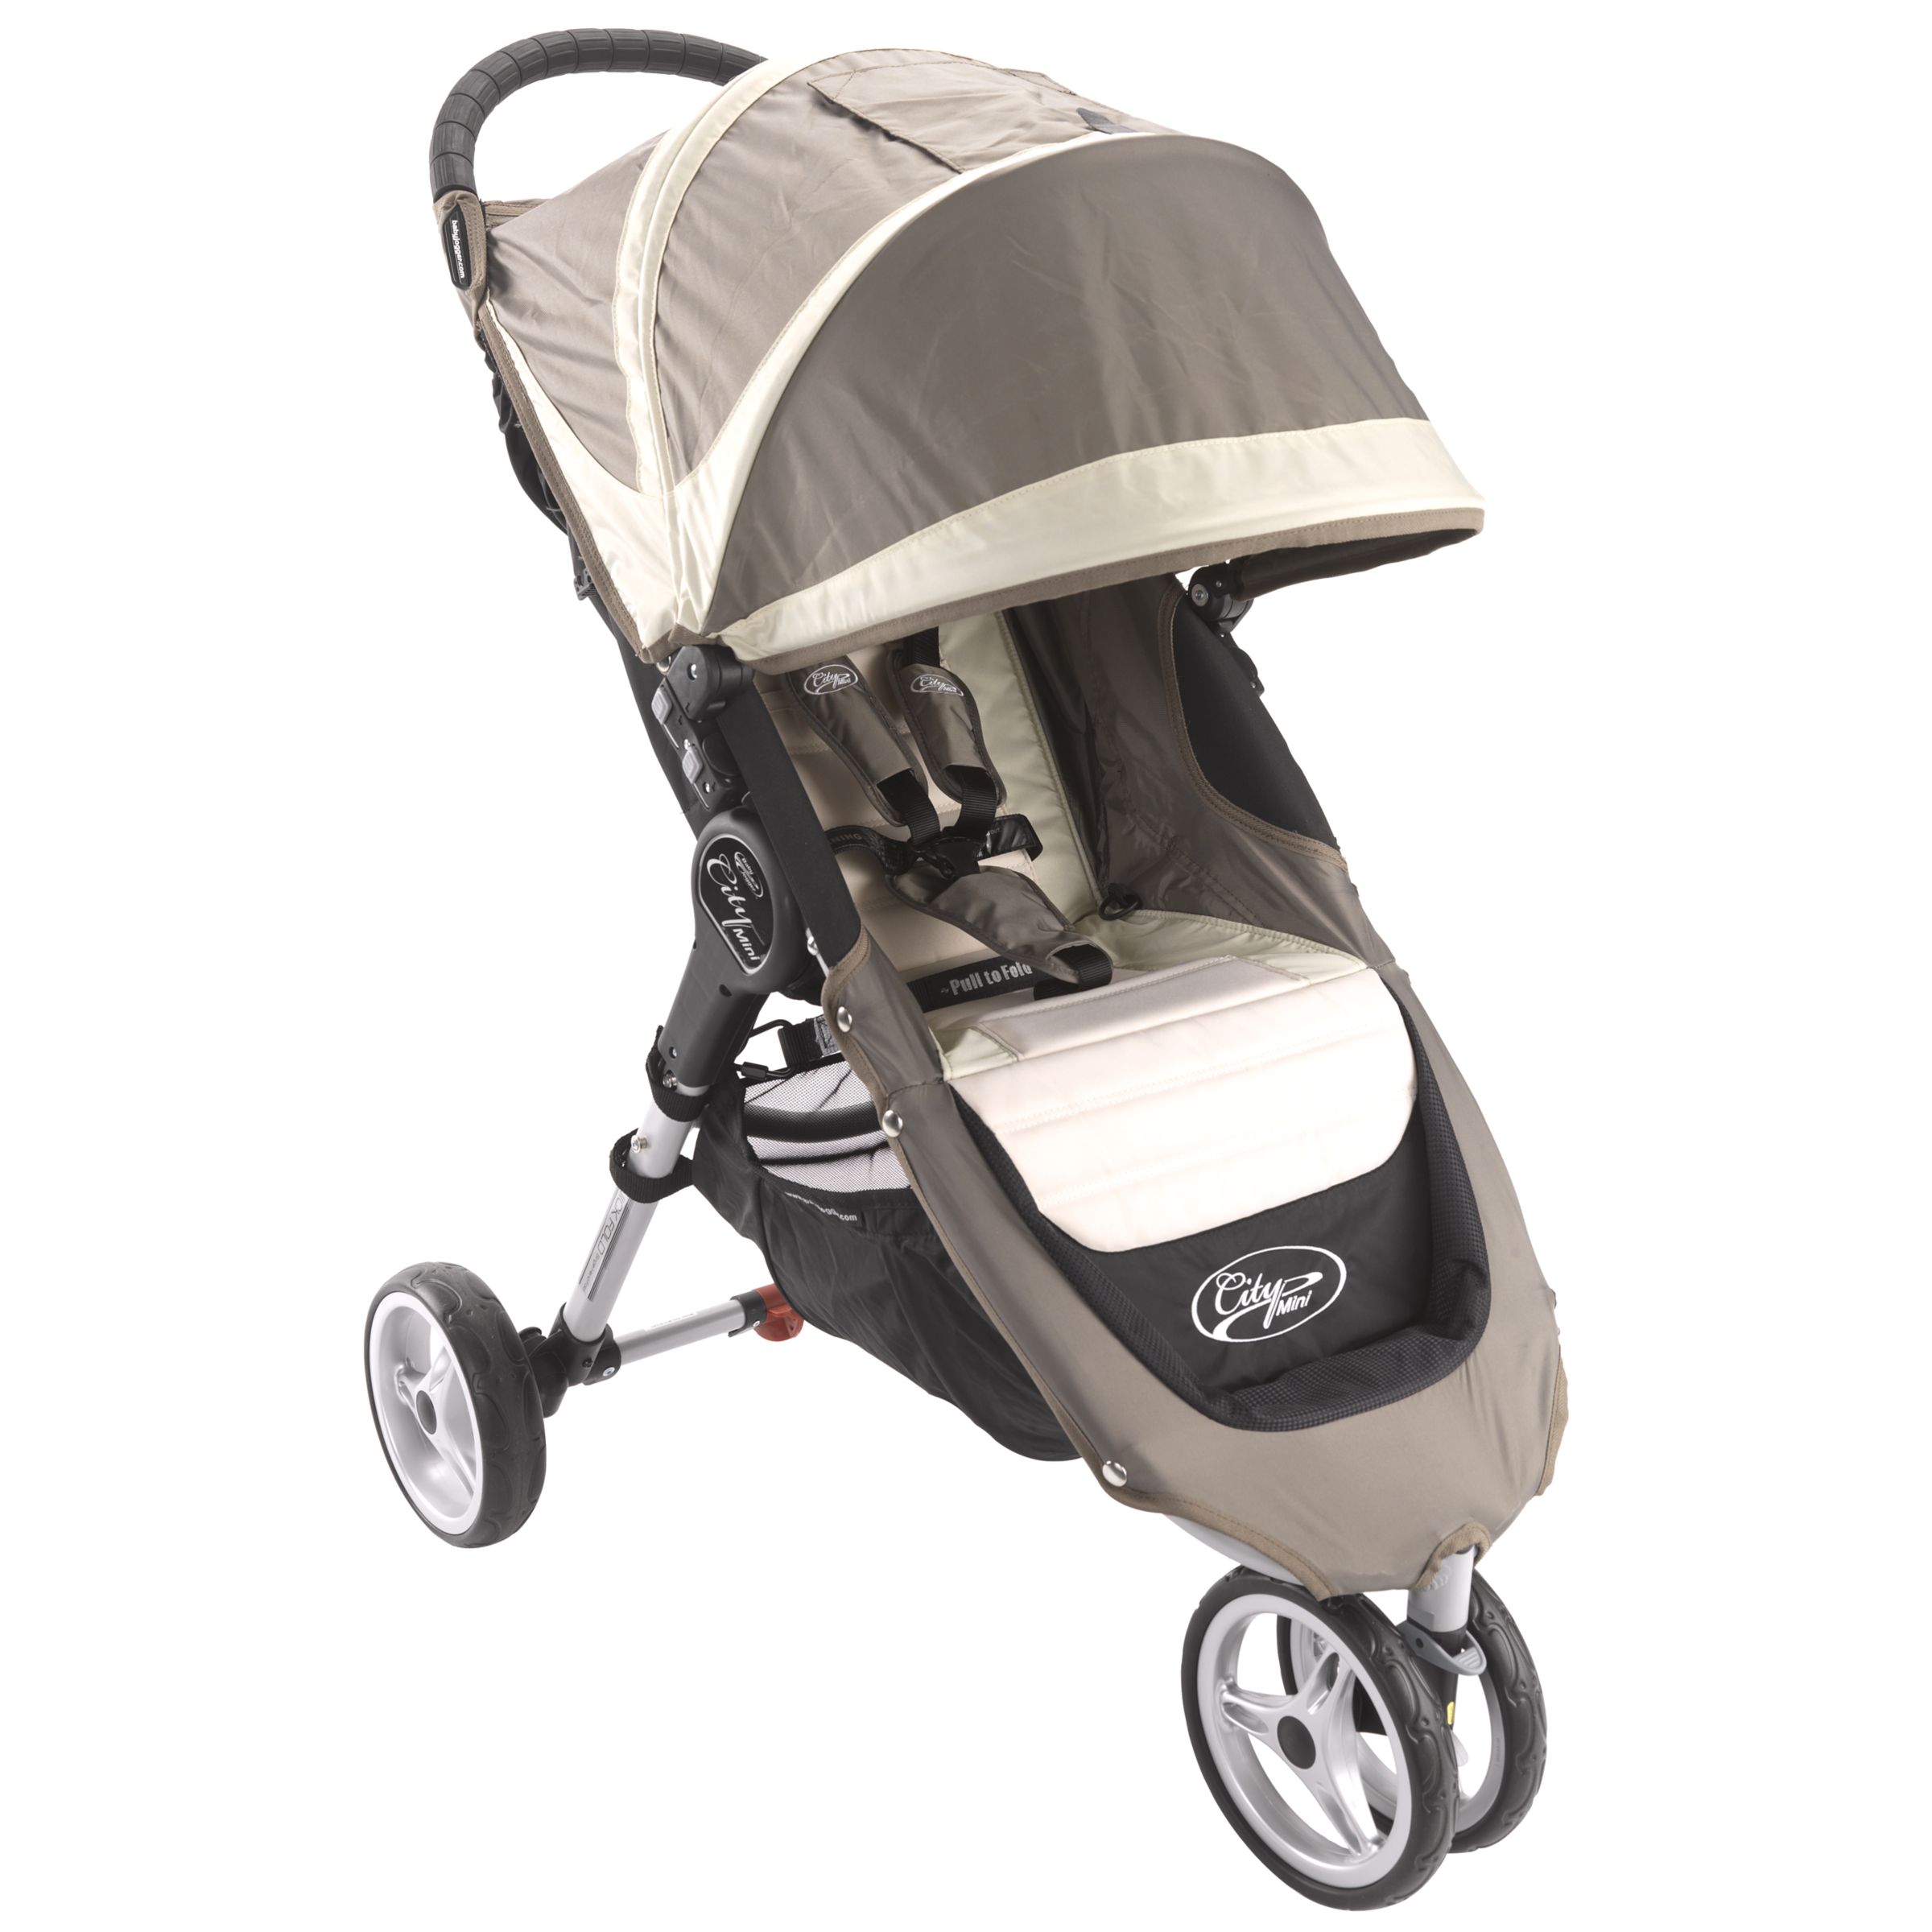 Baby Jogger City Mini Stroller, Stone at JohnLewis